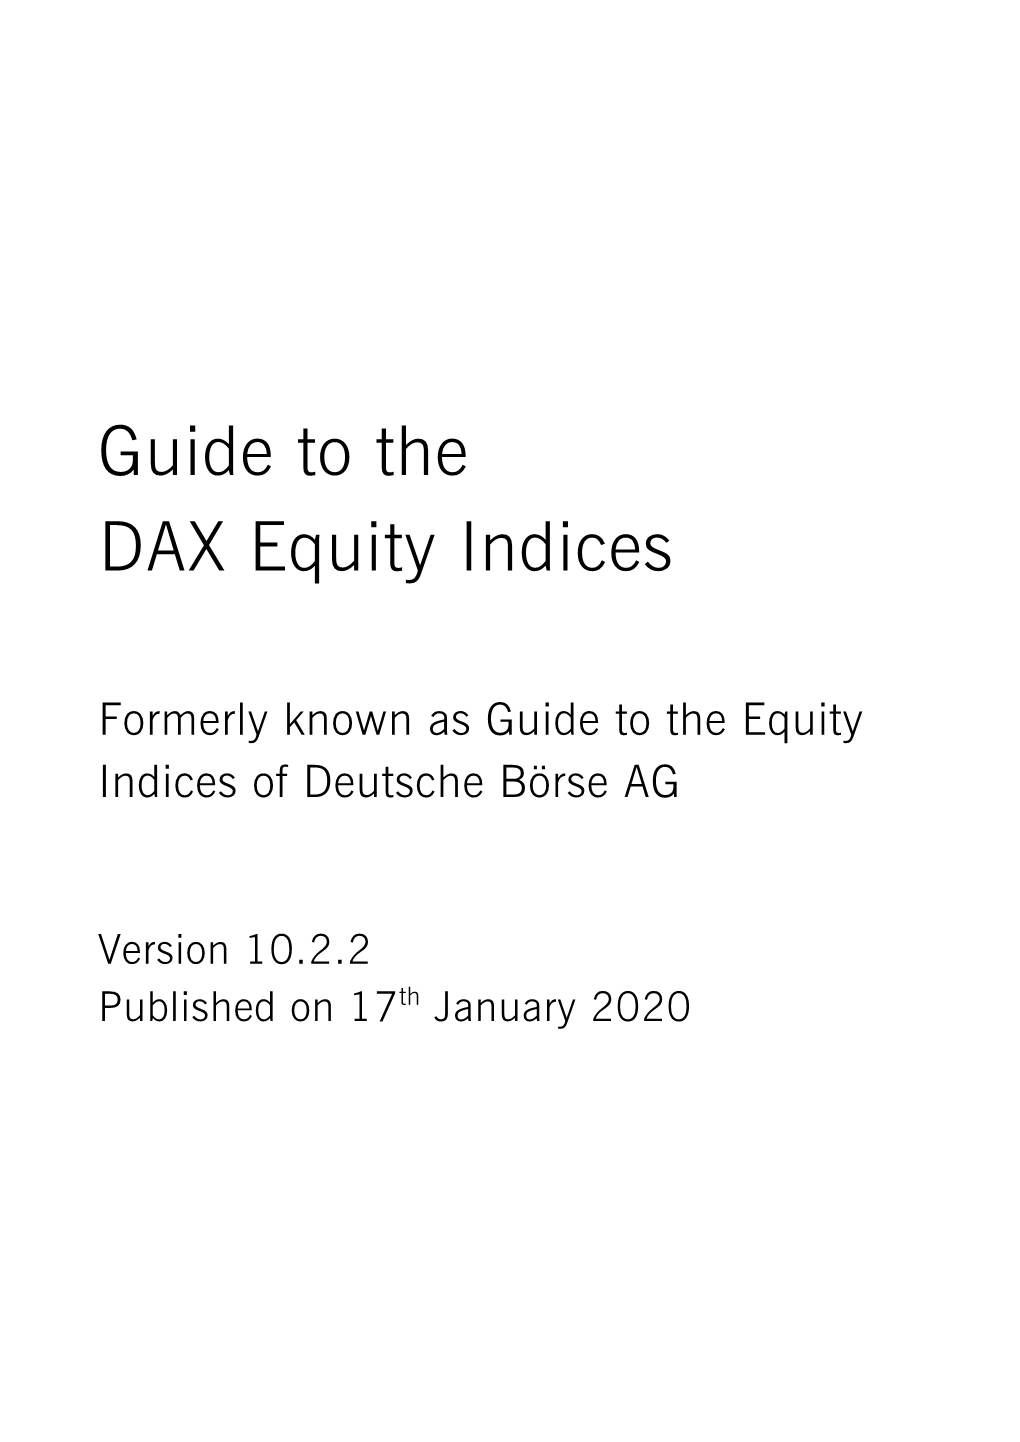 Guide to the DAX Equity Indices